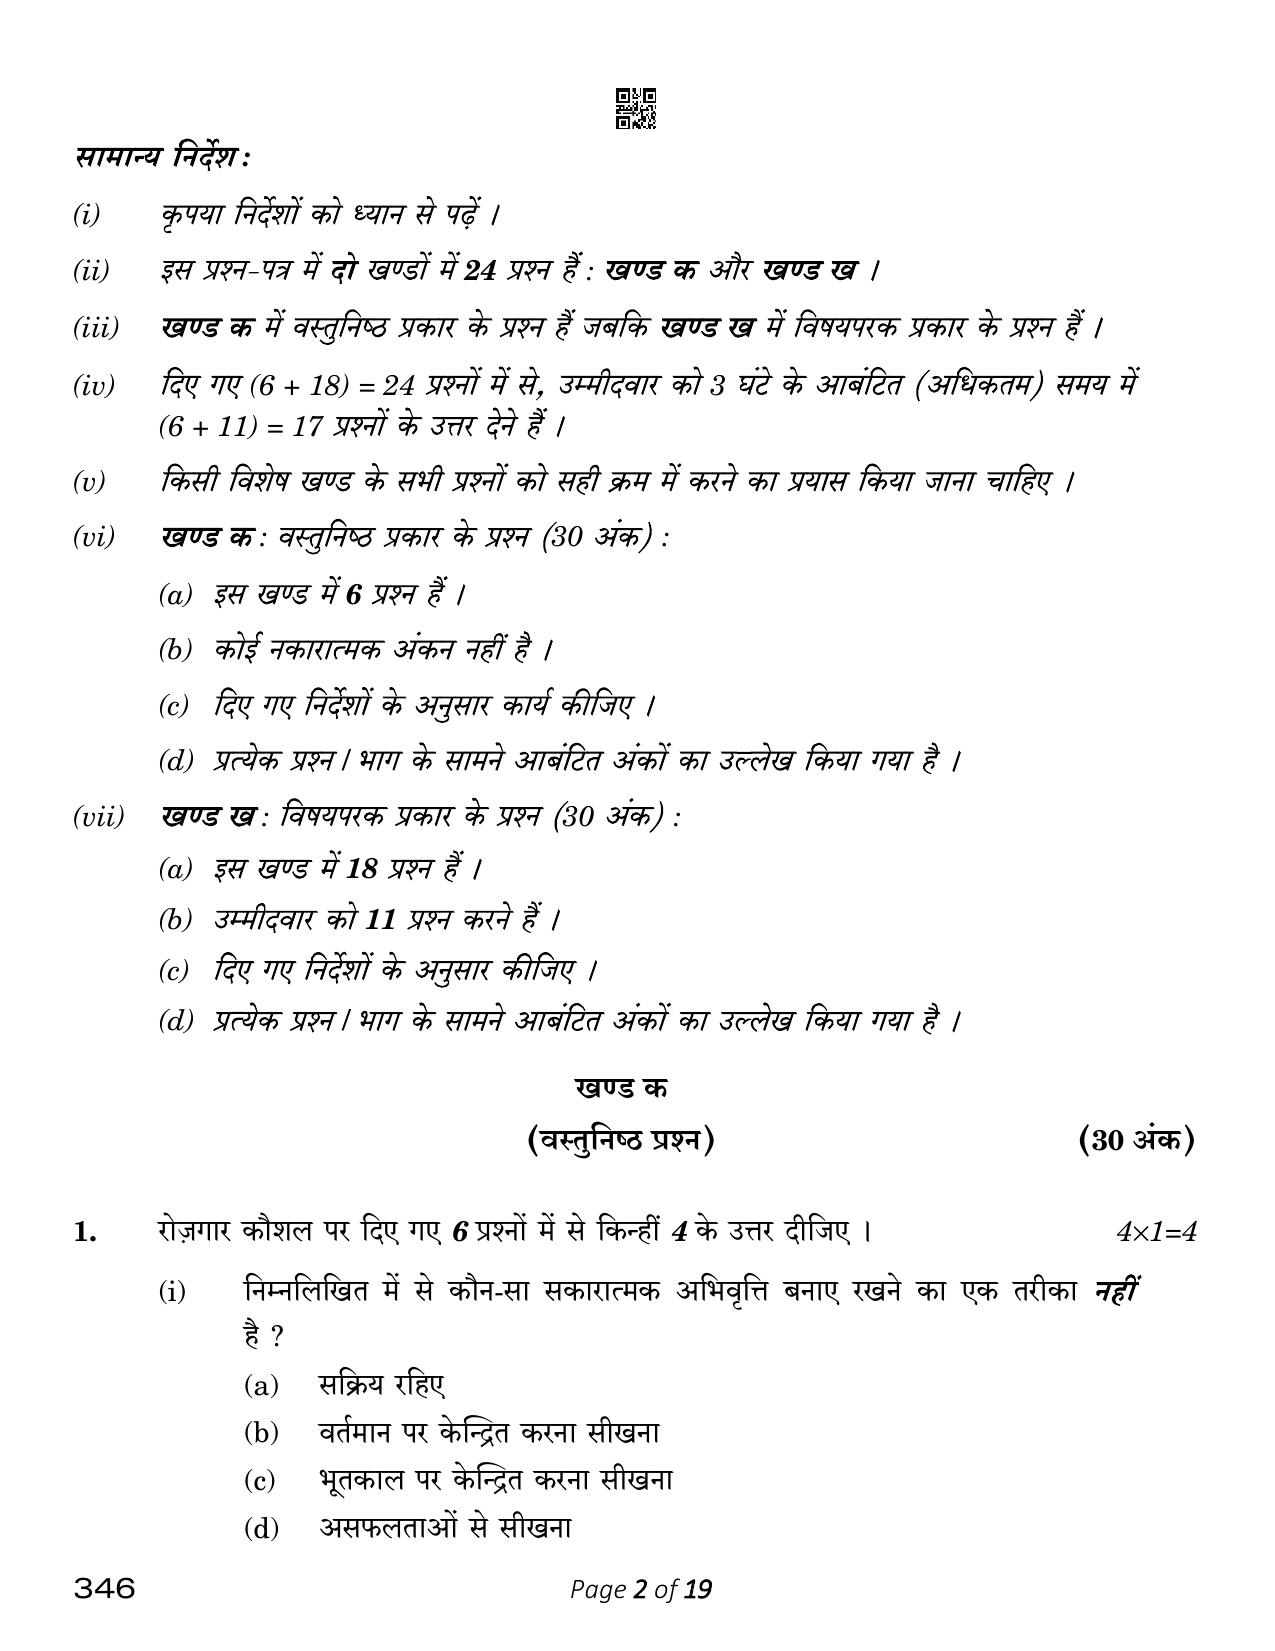 CBSE Class 12 Taxation (Compartment) 2023 Question Paper - Page 2